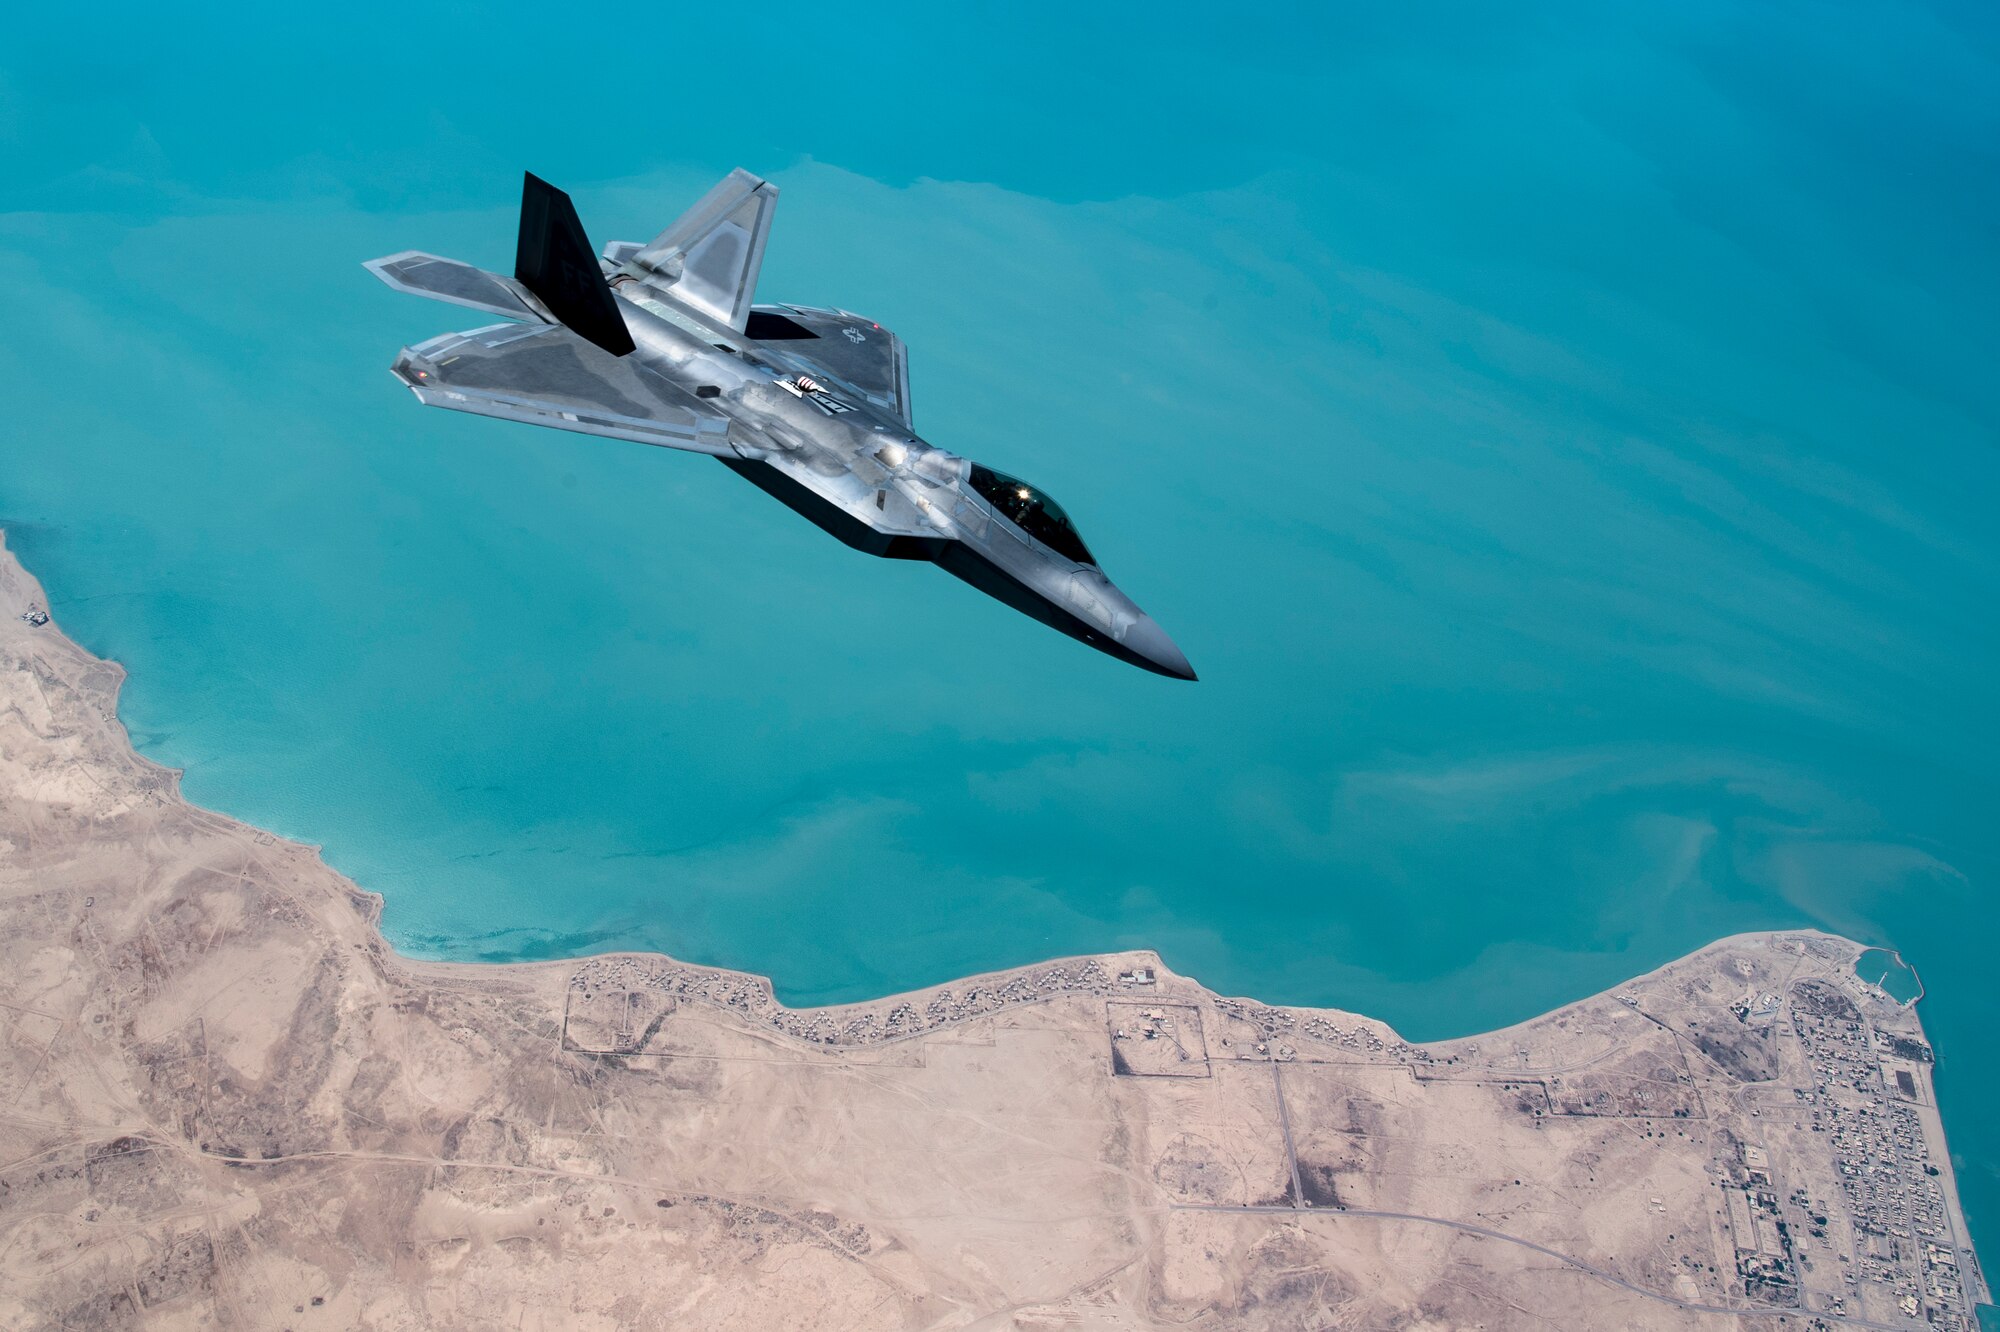 A U.S. F-22 Raptor conducts a combat air patrol mission over an undisclosed location in Southwest Asia, Sept. 13, 2019. The F-22, a critical component of the Global Strike Task Force, is designed to project air dominance, rapidly and at great distances and defeat threats attempting to deny access to our nation's Air Force, Army, Navy and Marine Corps. The F-22 cannot be matched by any known or projected fighter aircraft. (U.S. Air Force photo by Master Sgt. Russ Scalf)